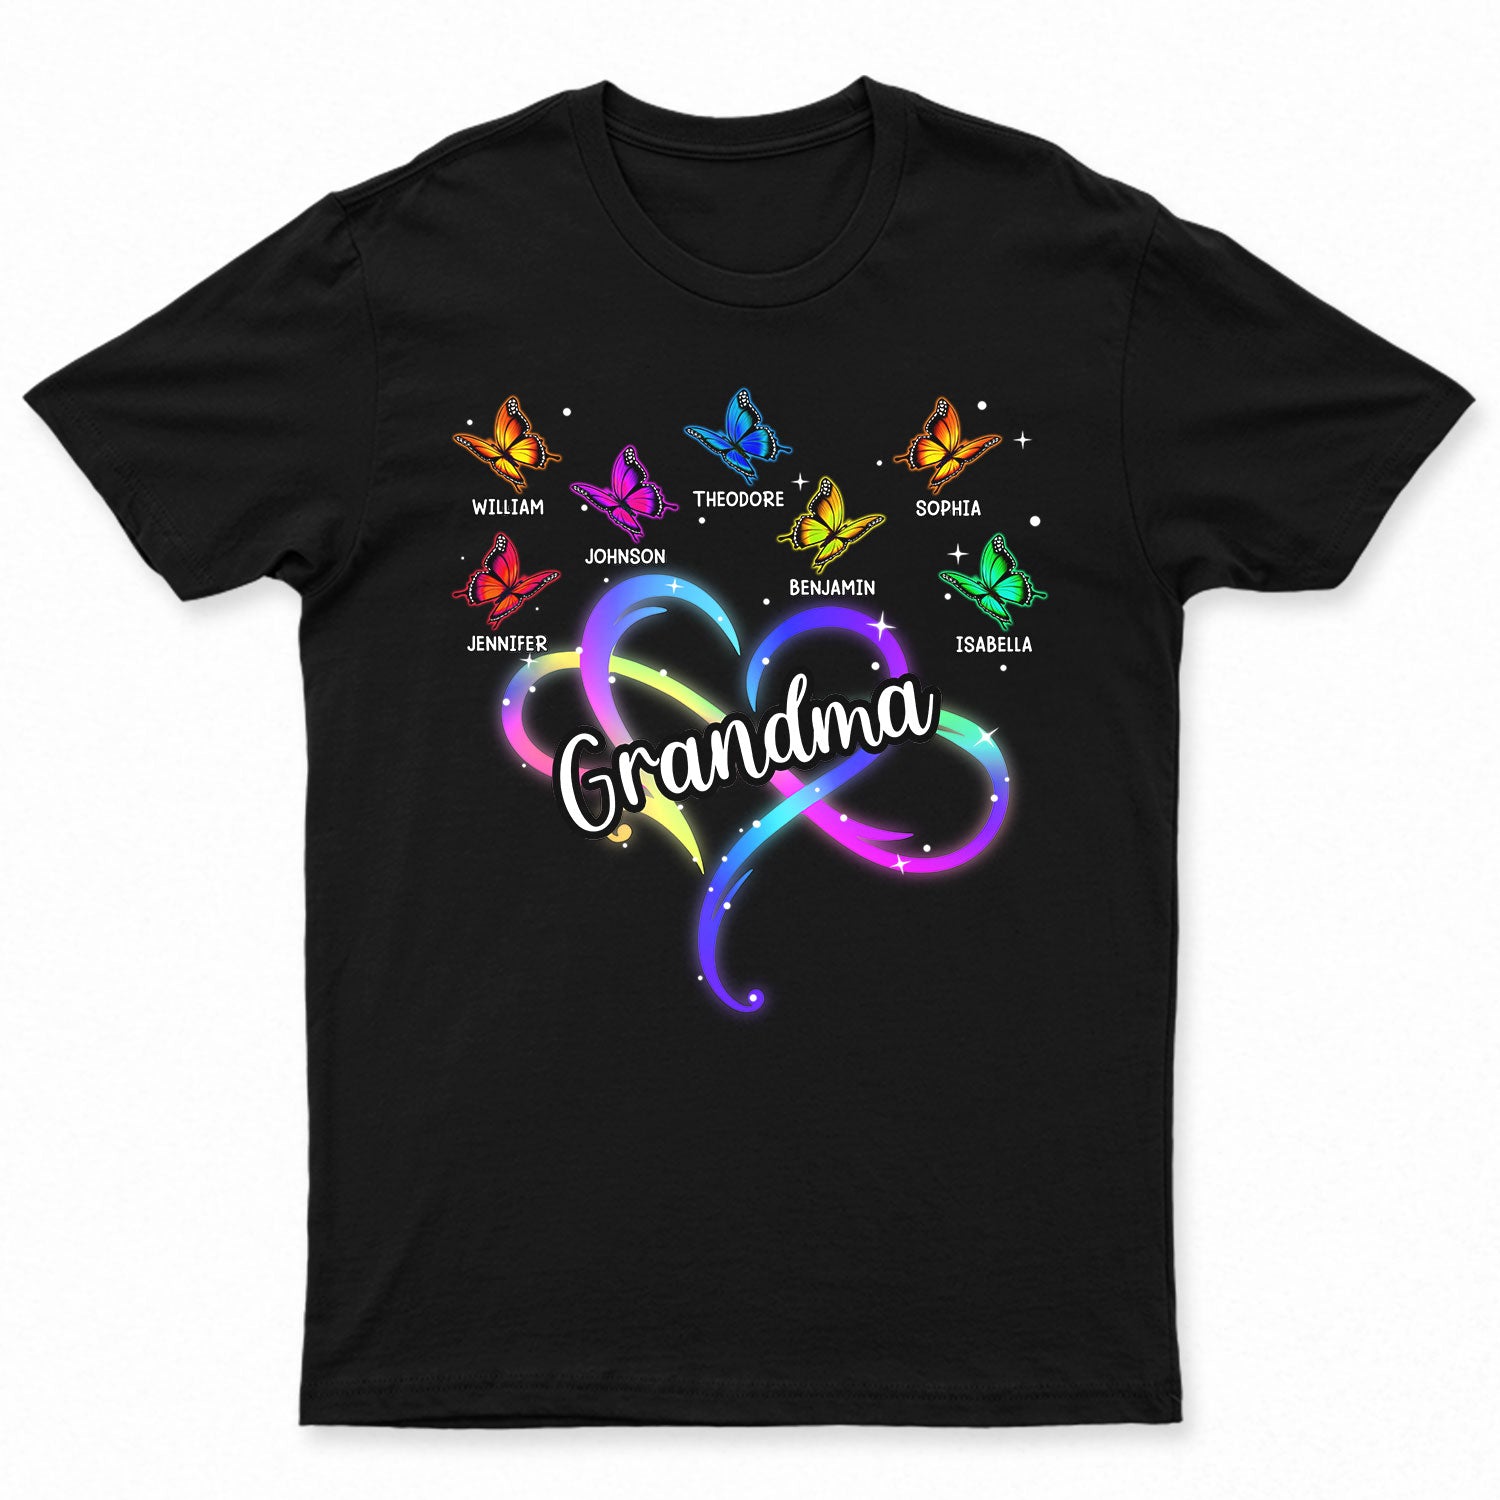 Mom Grandma Infinity Heart - Gift For Mother, Grandmother - Personalized T Shirt